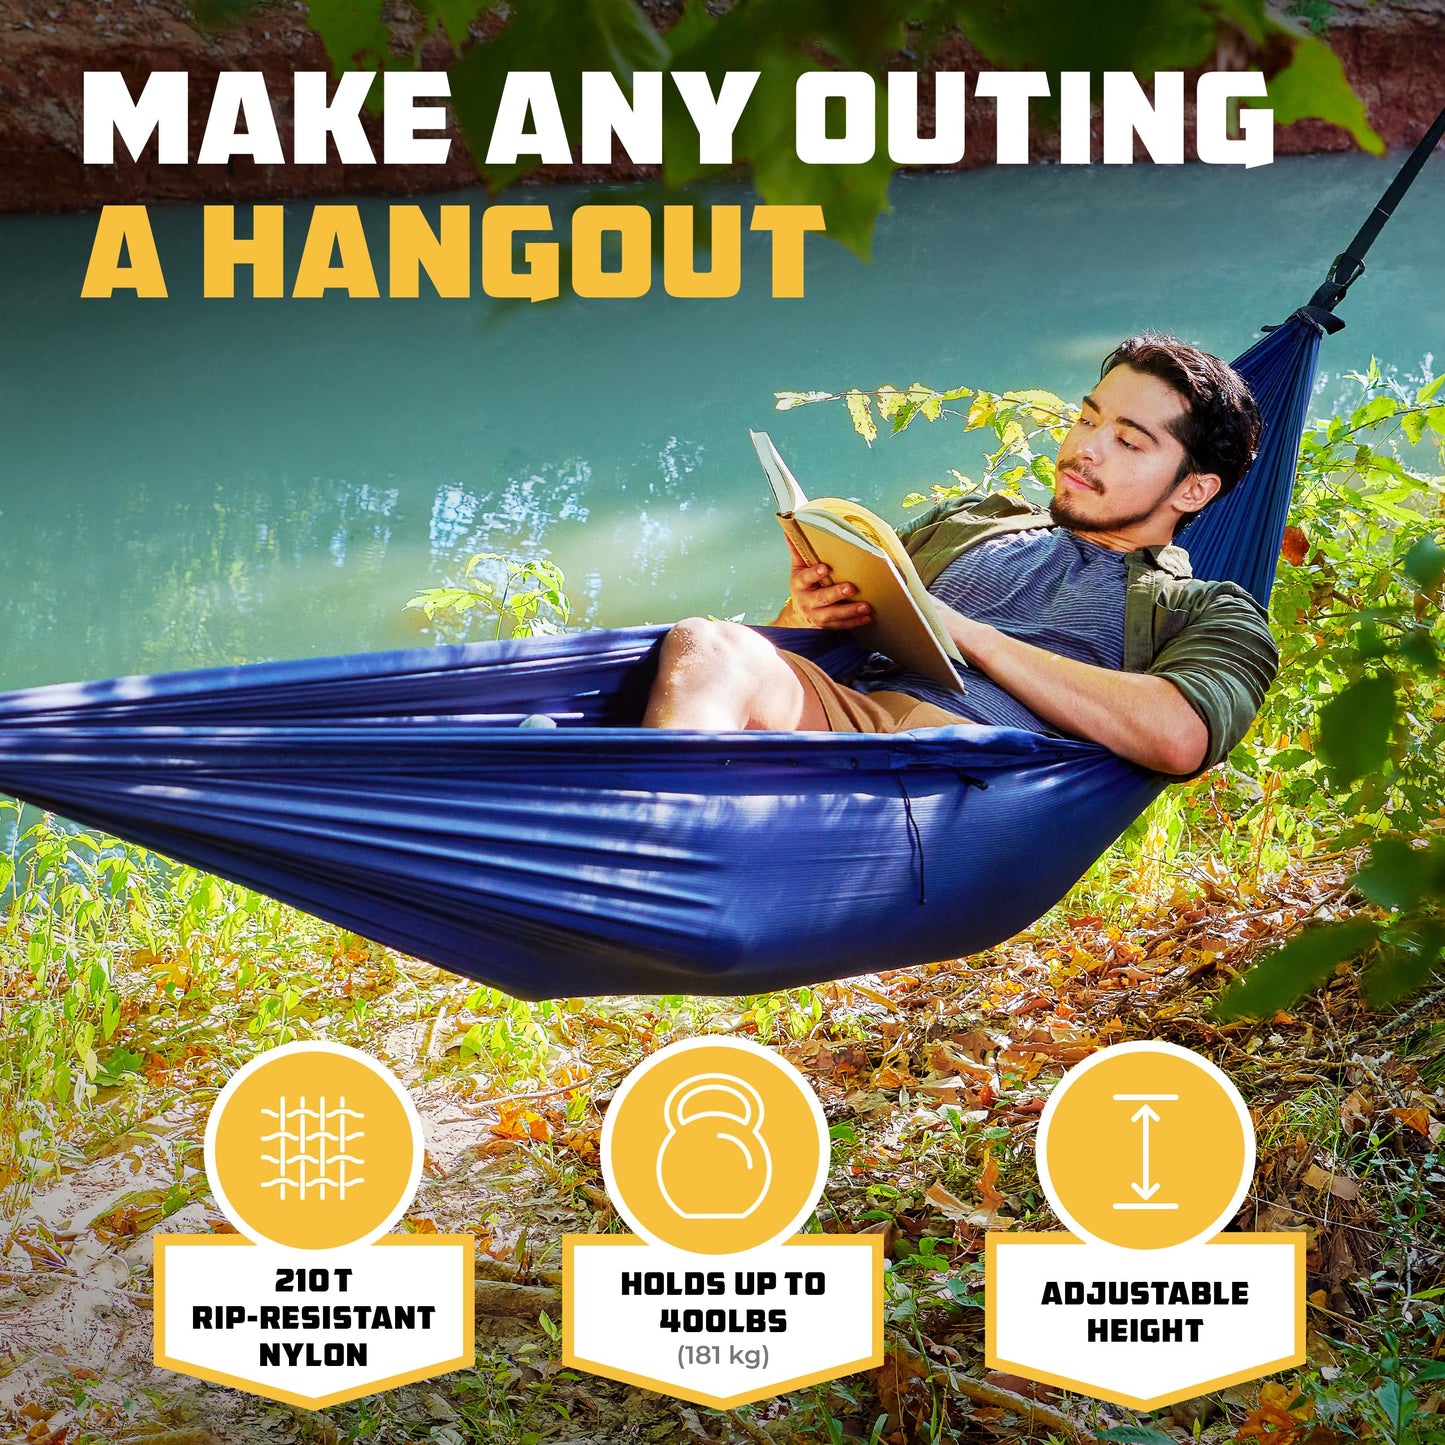 Wise Owl Outfitters 4in1 Hammock - Camping Hammock, Shelter Tarp, Poncho, and Footprint - Camping Essentials and Accessories for Campers